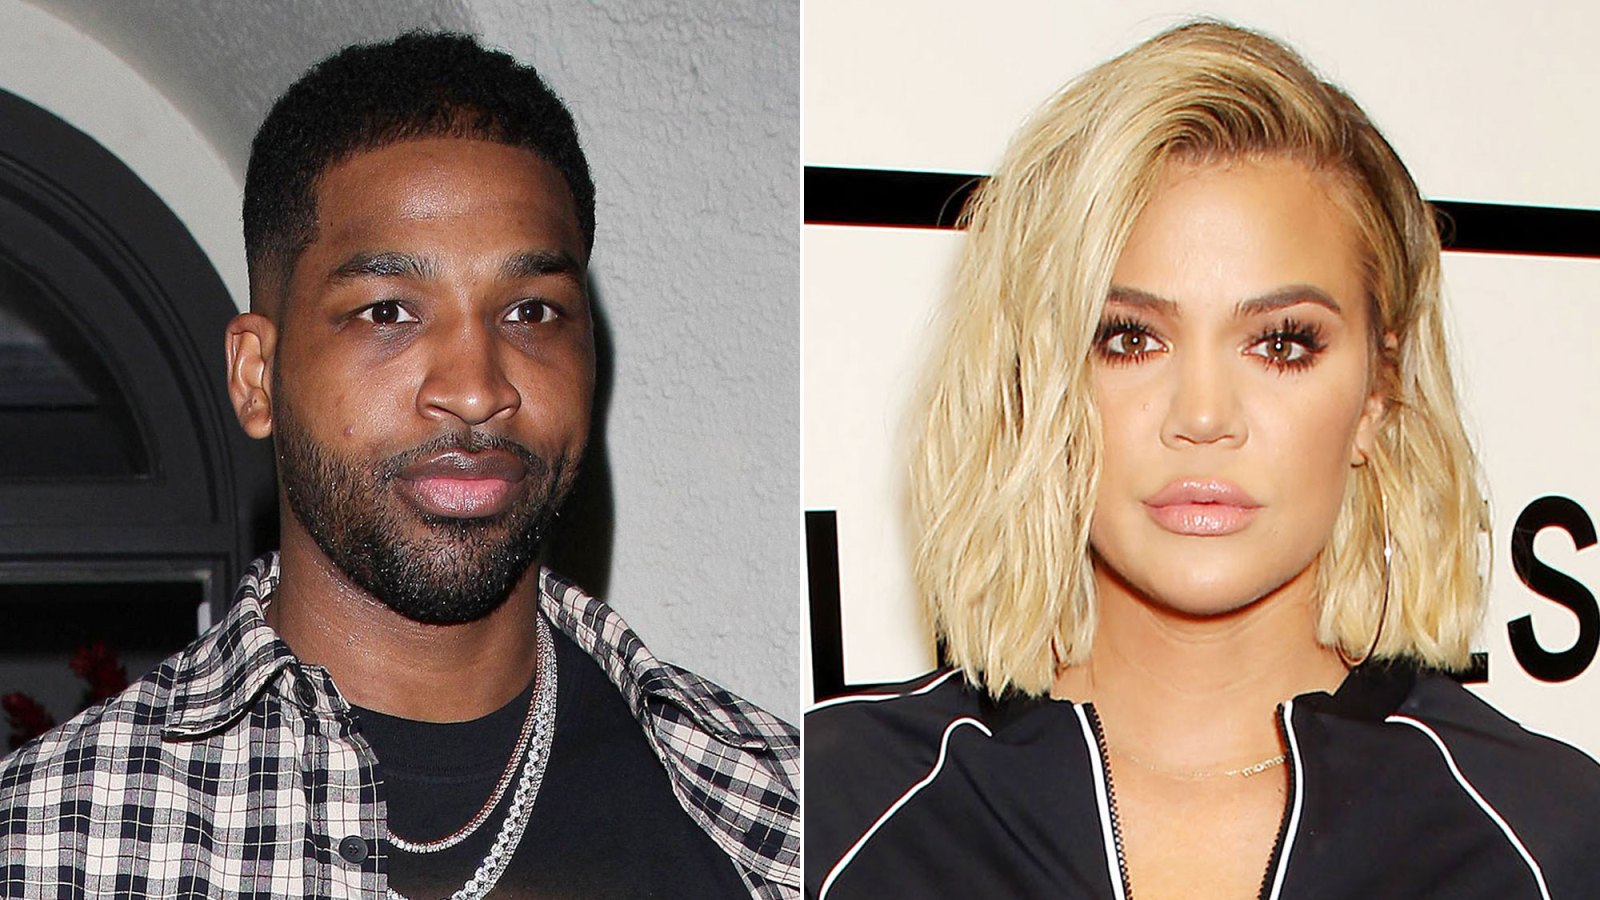 Tristan Thompson Seemingly Heckled With Chants About Khloe Kardashian During Chicago Bulls Game